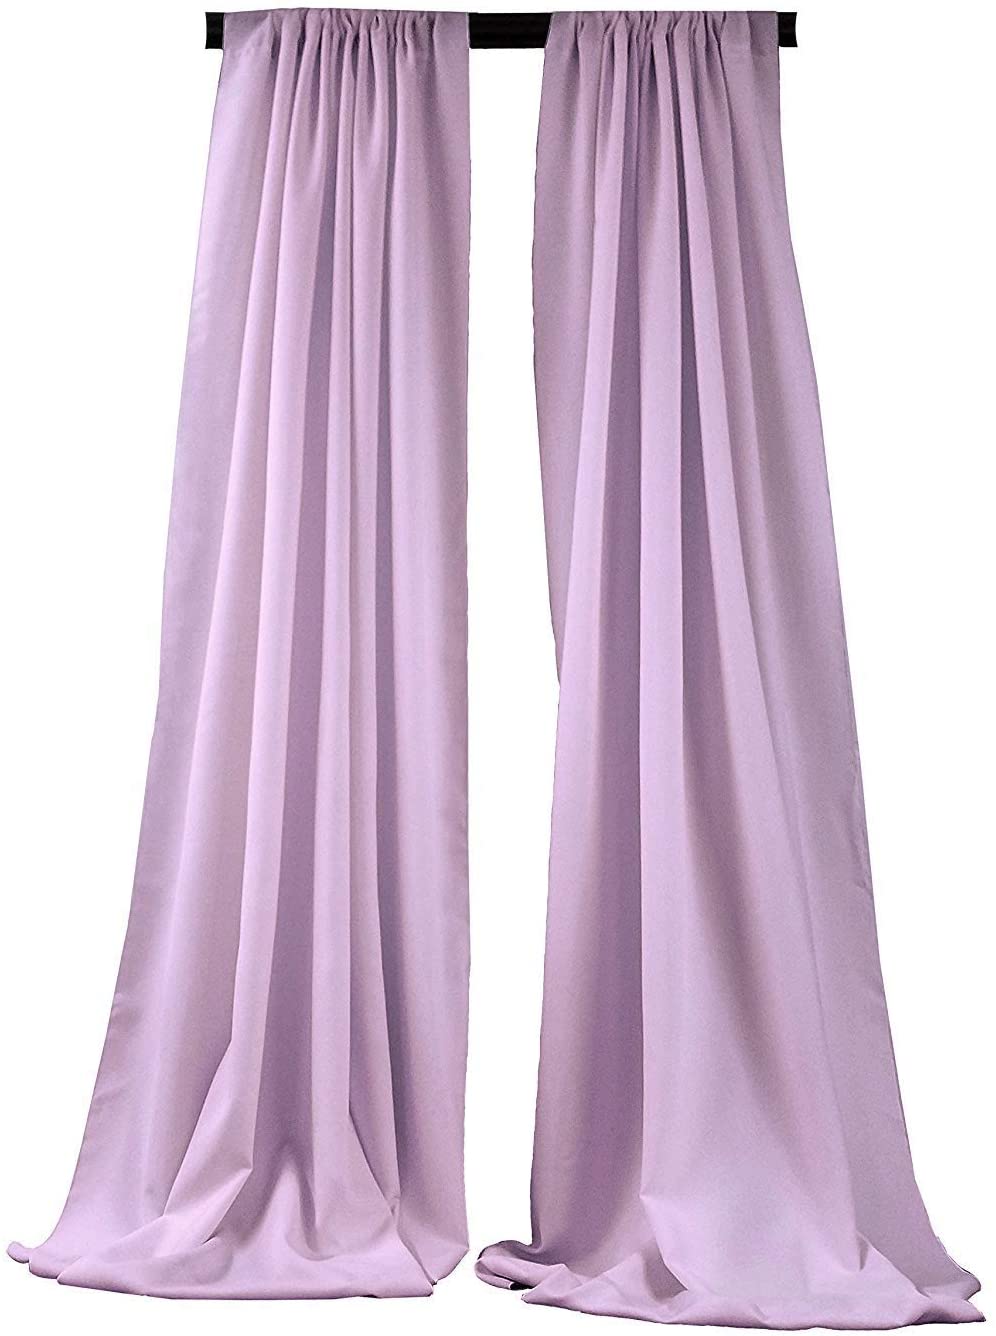 2 Panels 5 Feet Wide Polyester Seamless Backdrop Drape Curtain Panel - (Lilac,